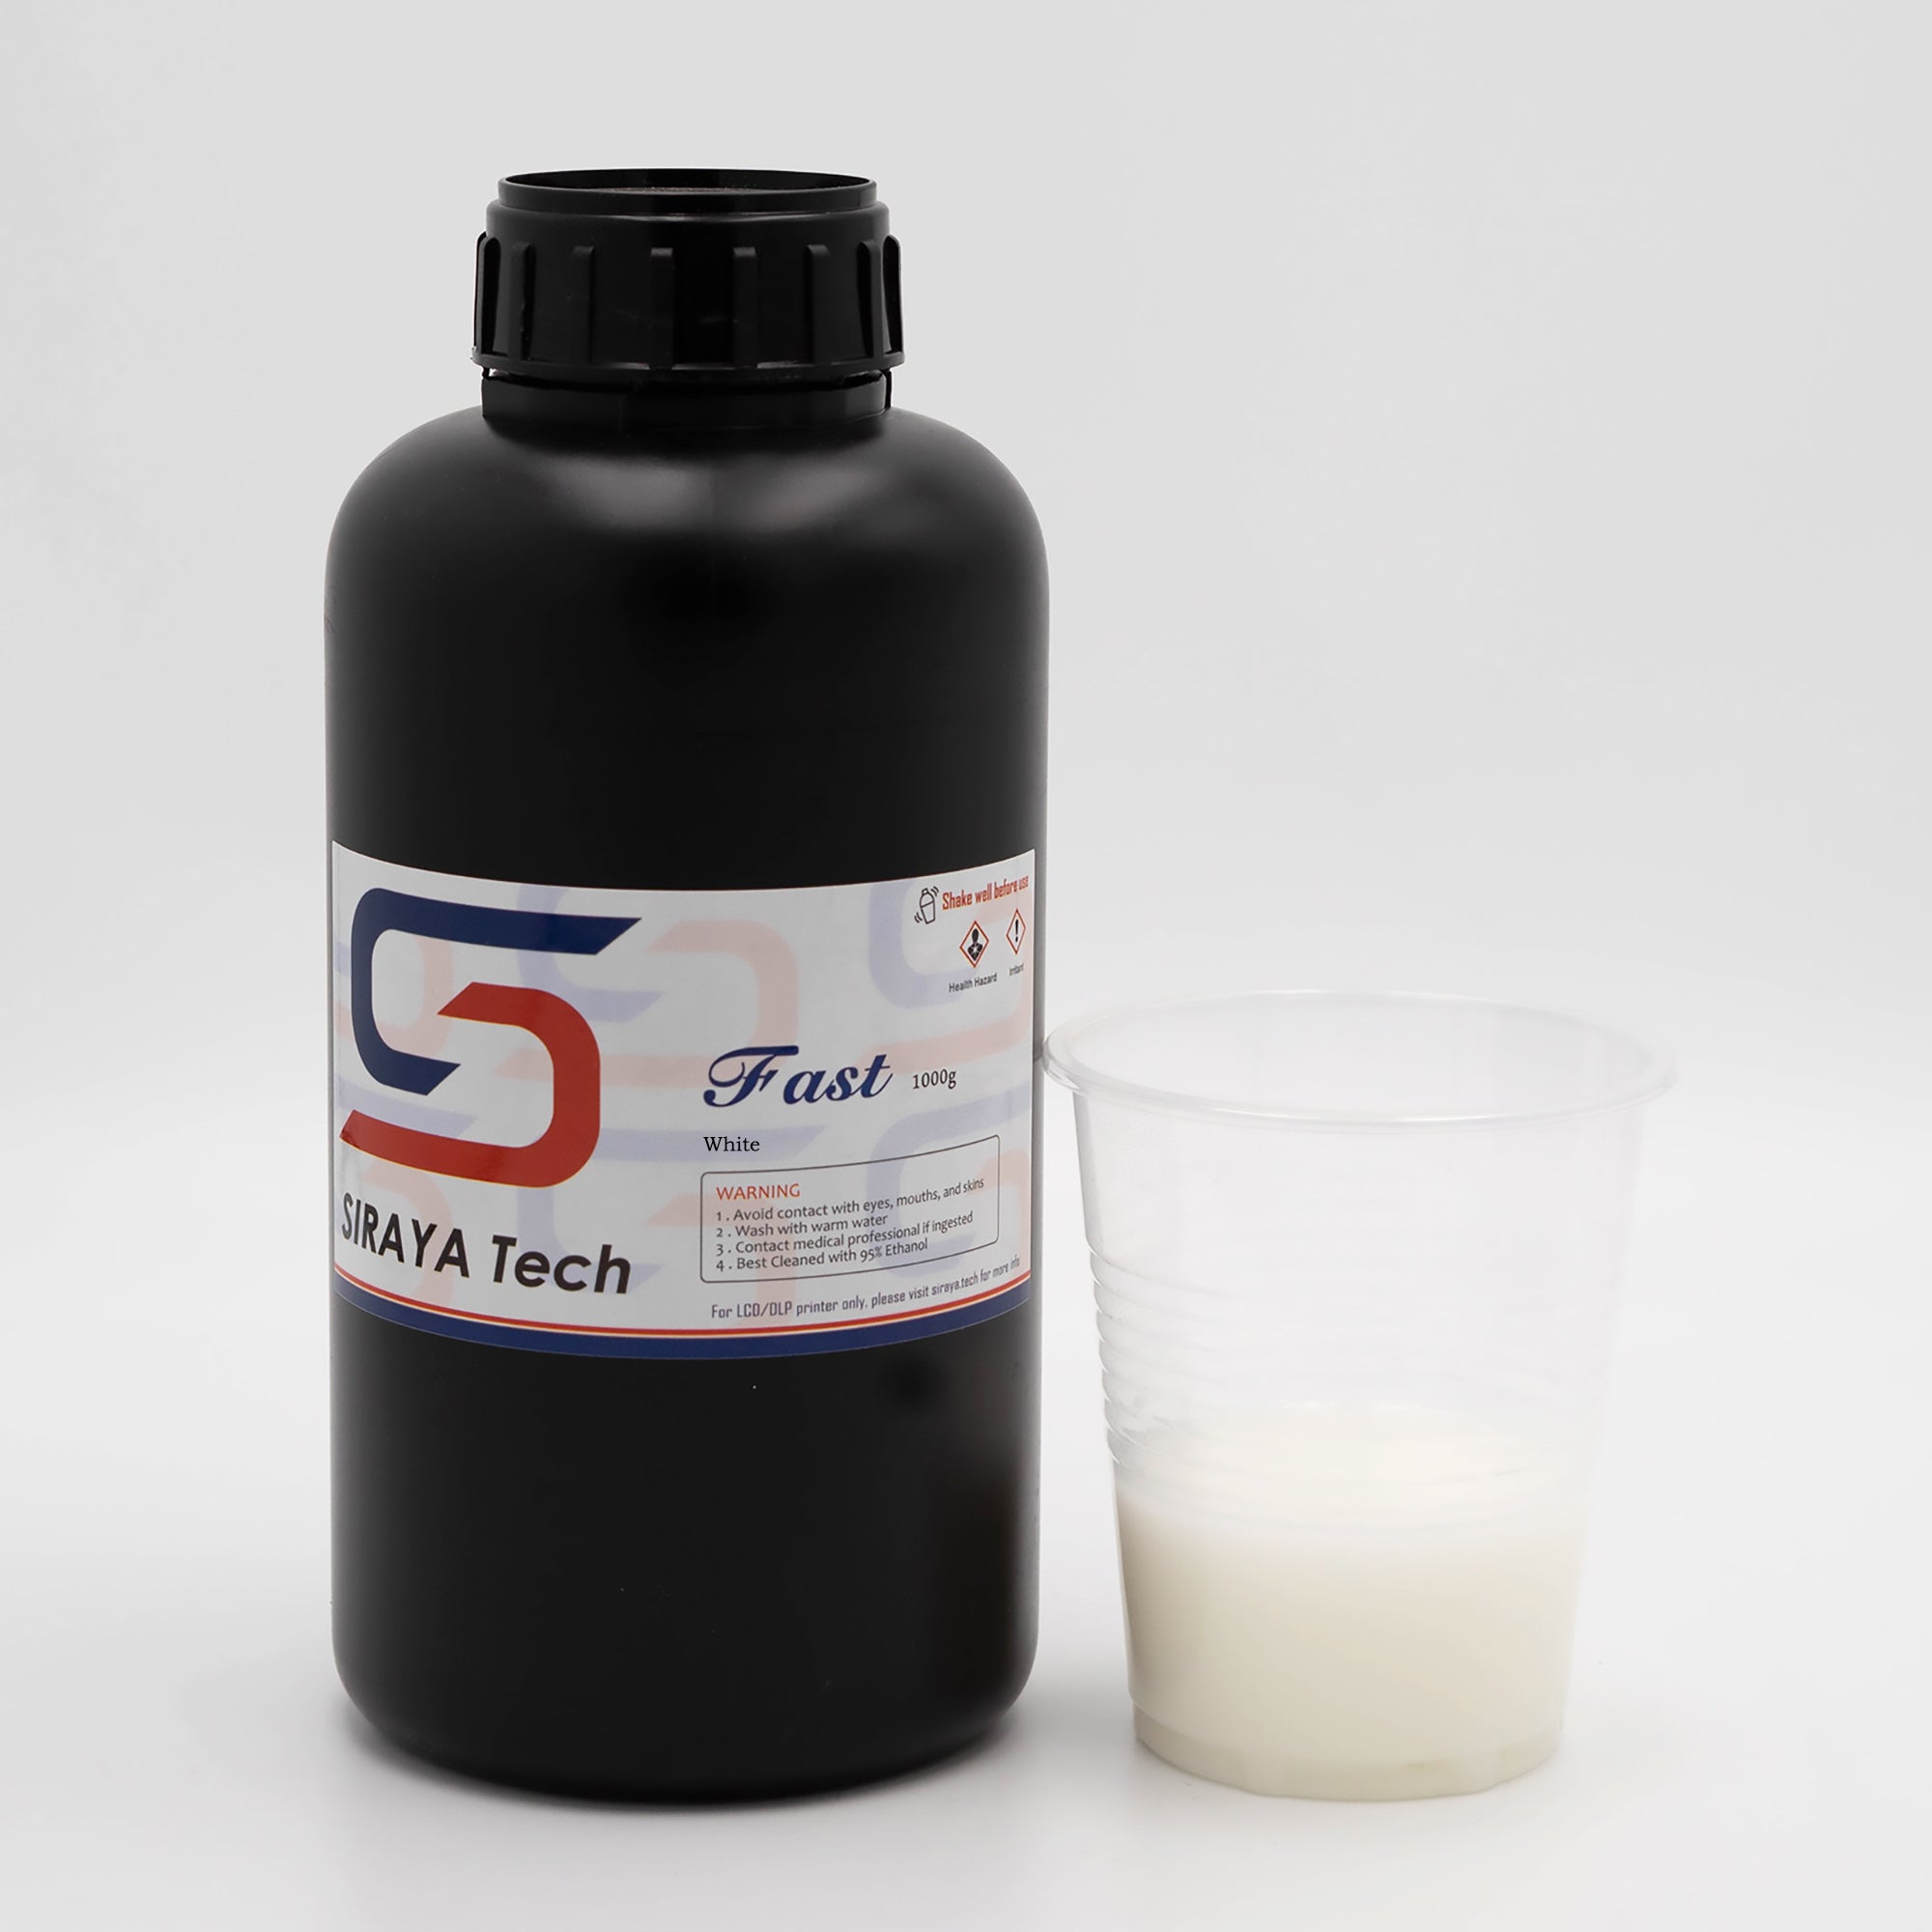 Fast White by Siraya Tech (1kg for CA)